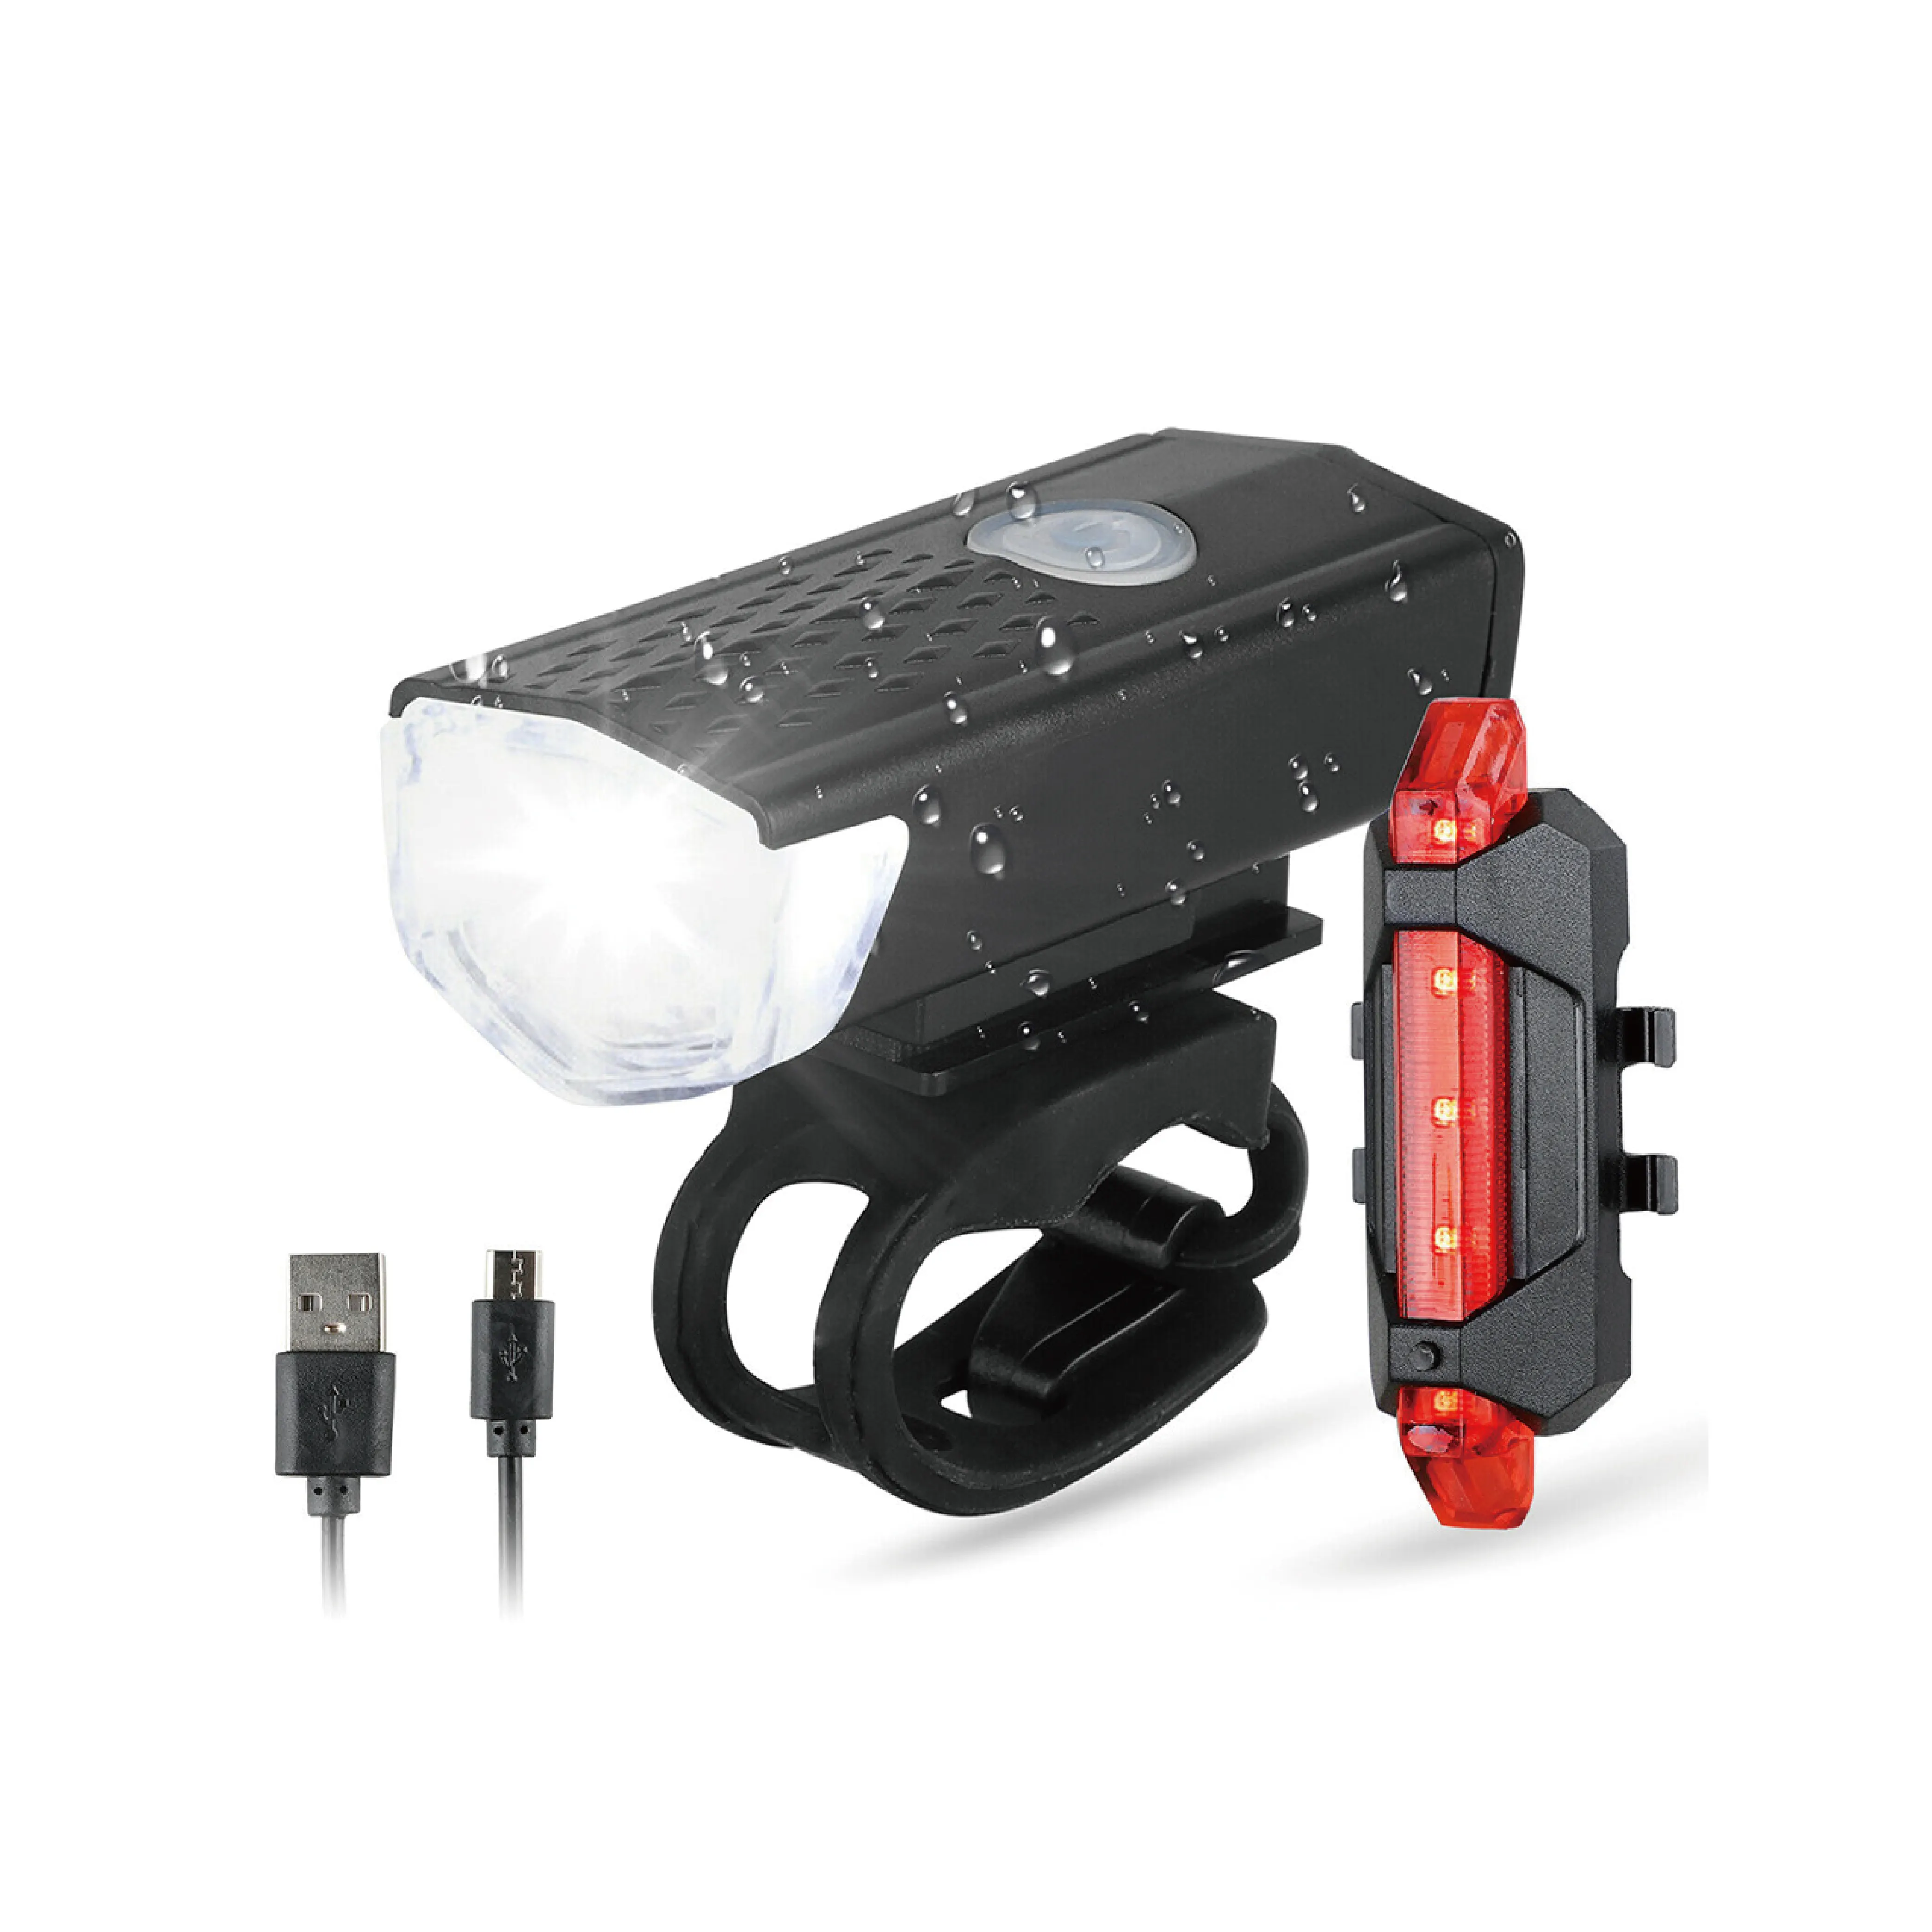 Outdoor Portable LED Front Rear Bicycle Light Flashlight USB Rechargeable IP65 Waterproof Cycling bike light set accessories